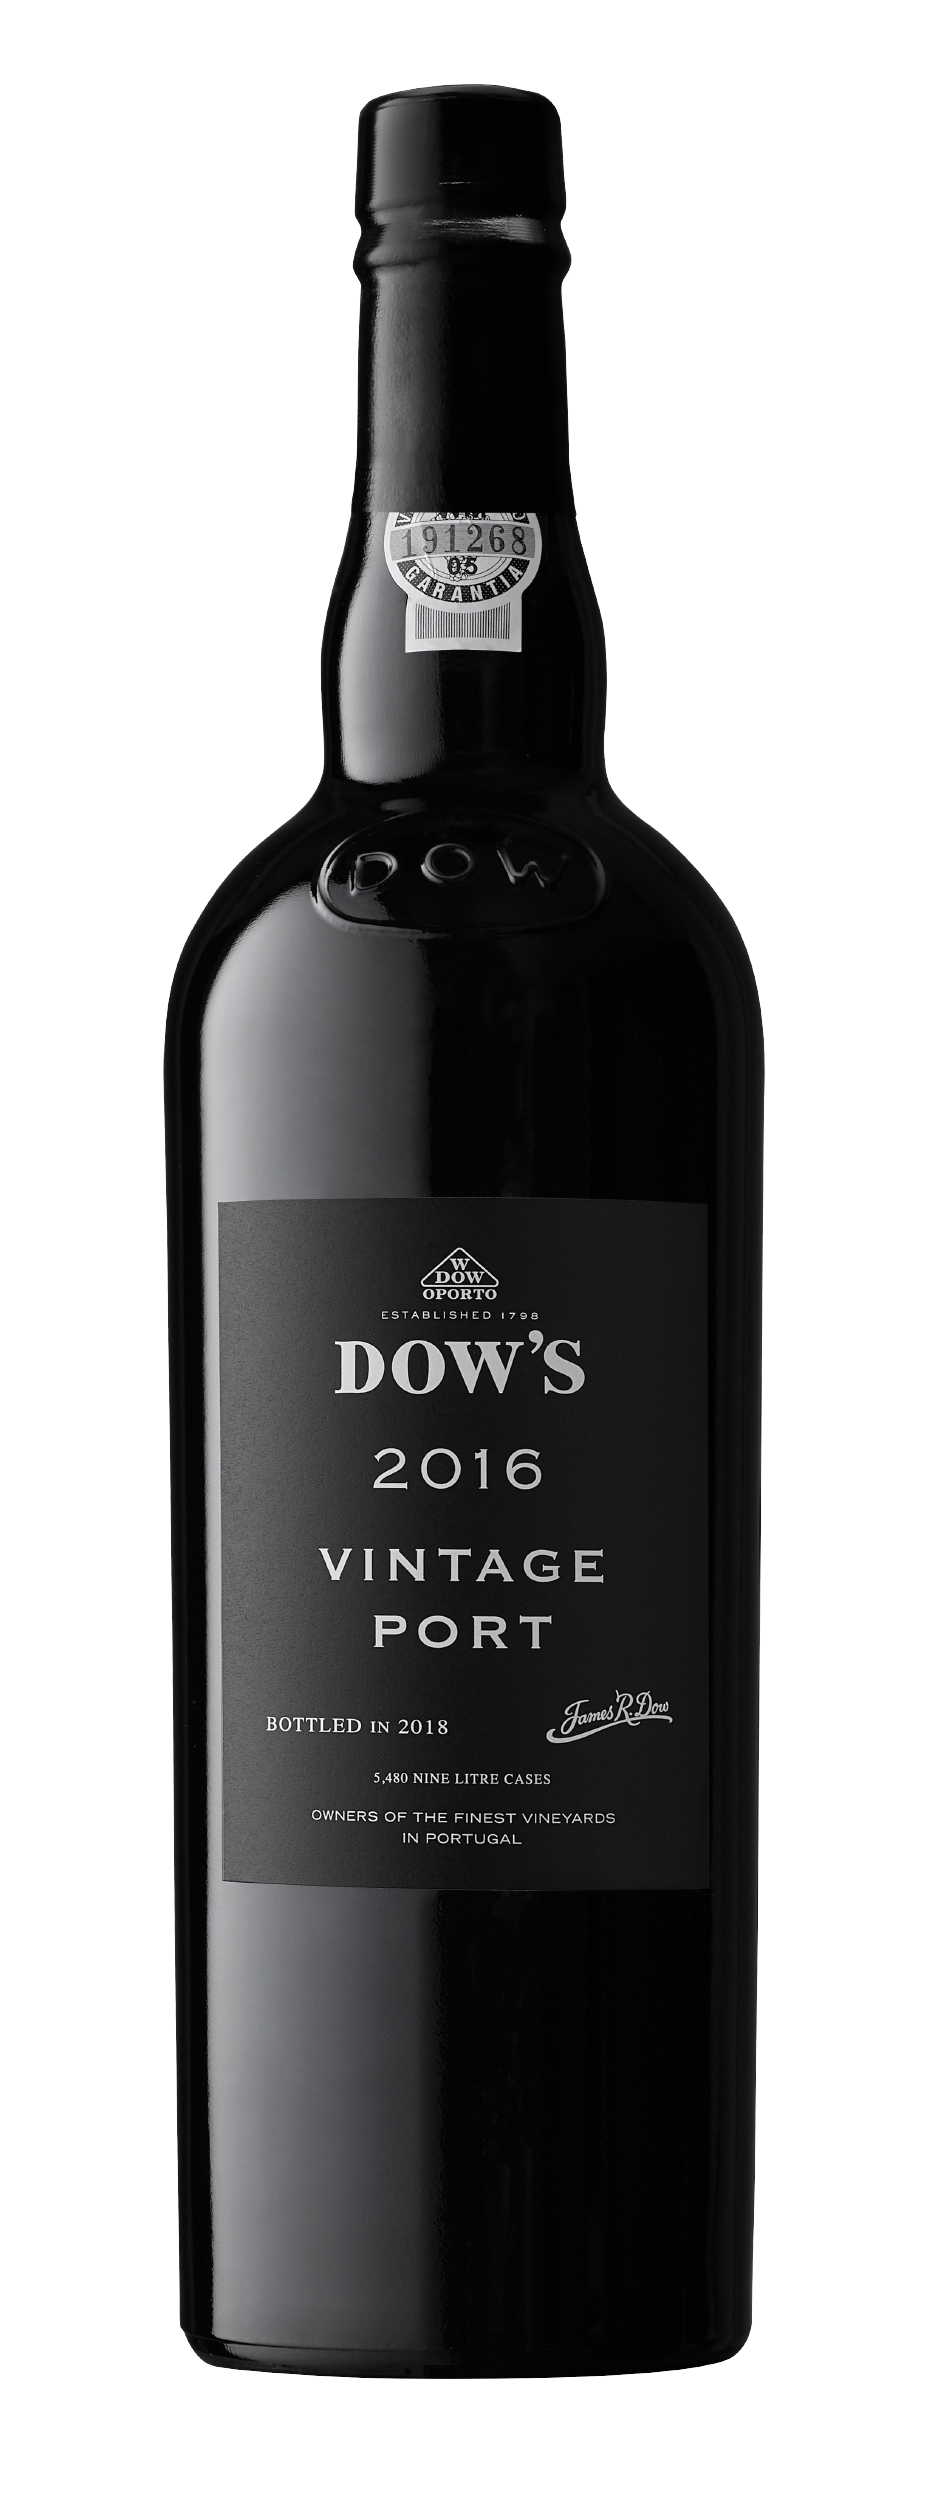 Product Image for DOW'S VINTAGE PORT 2016